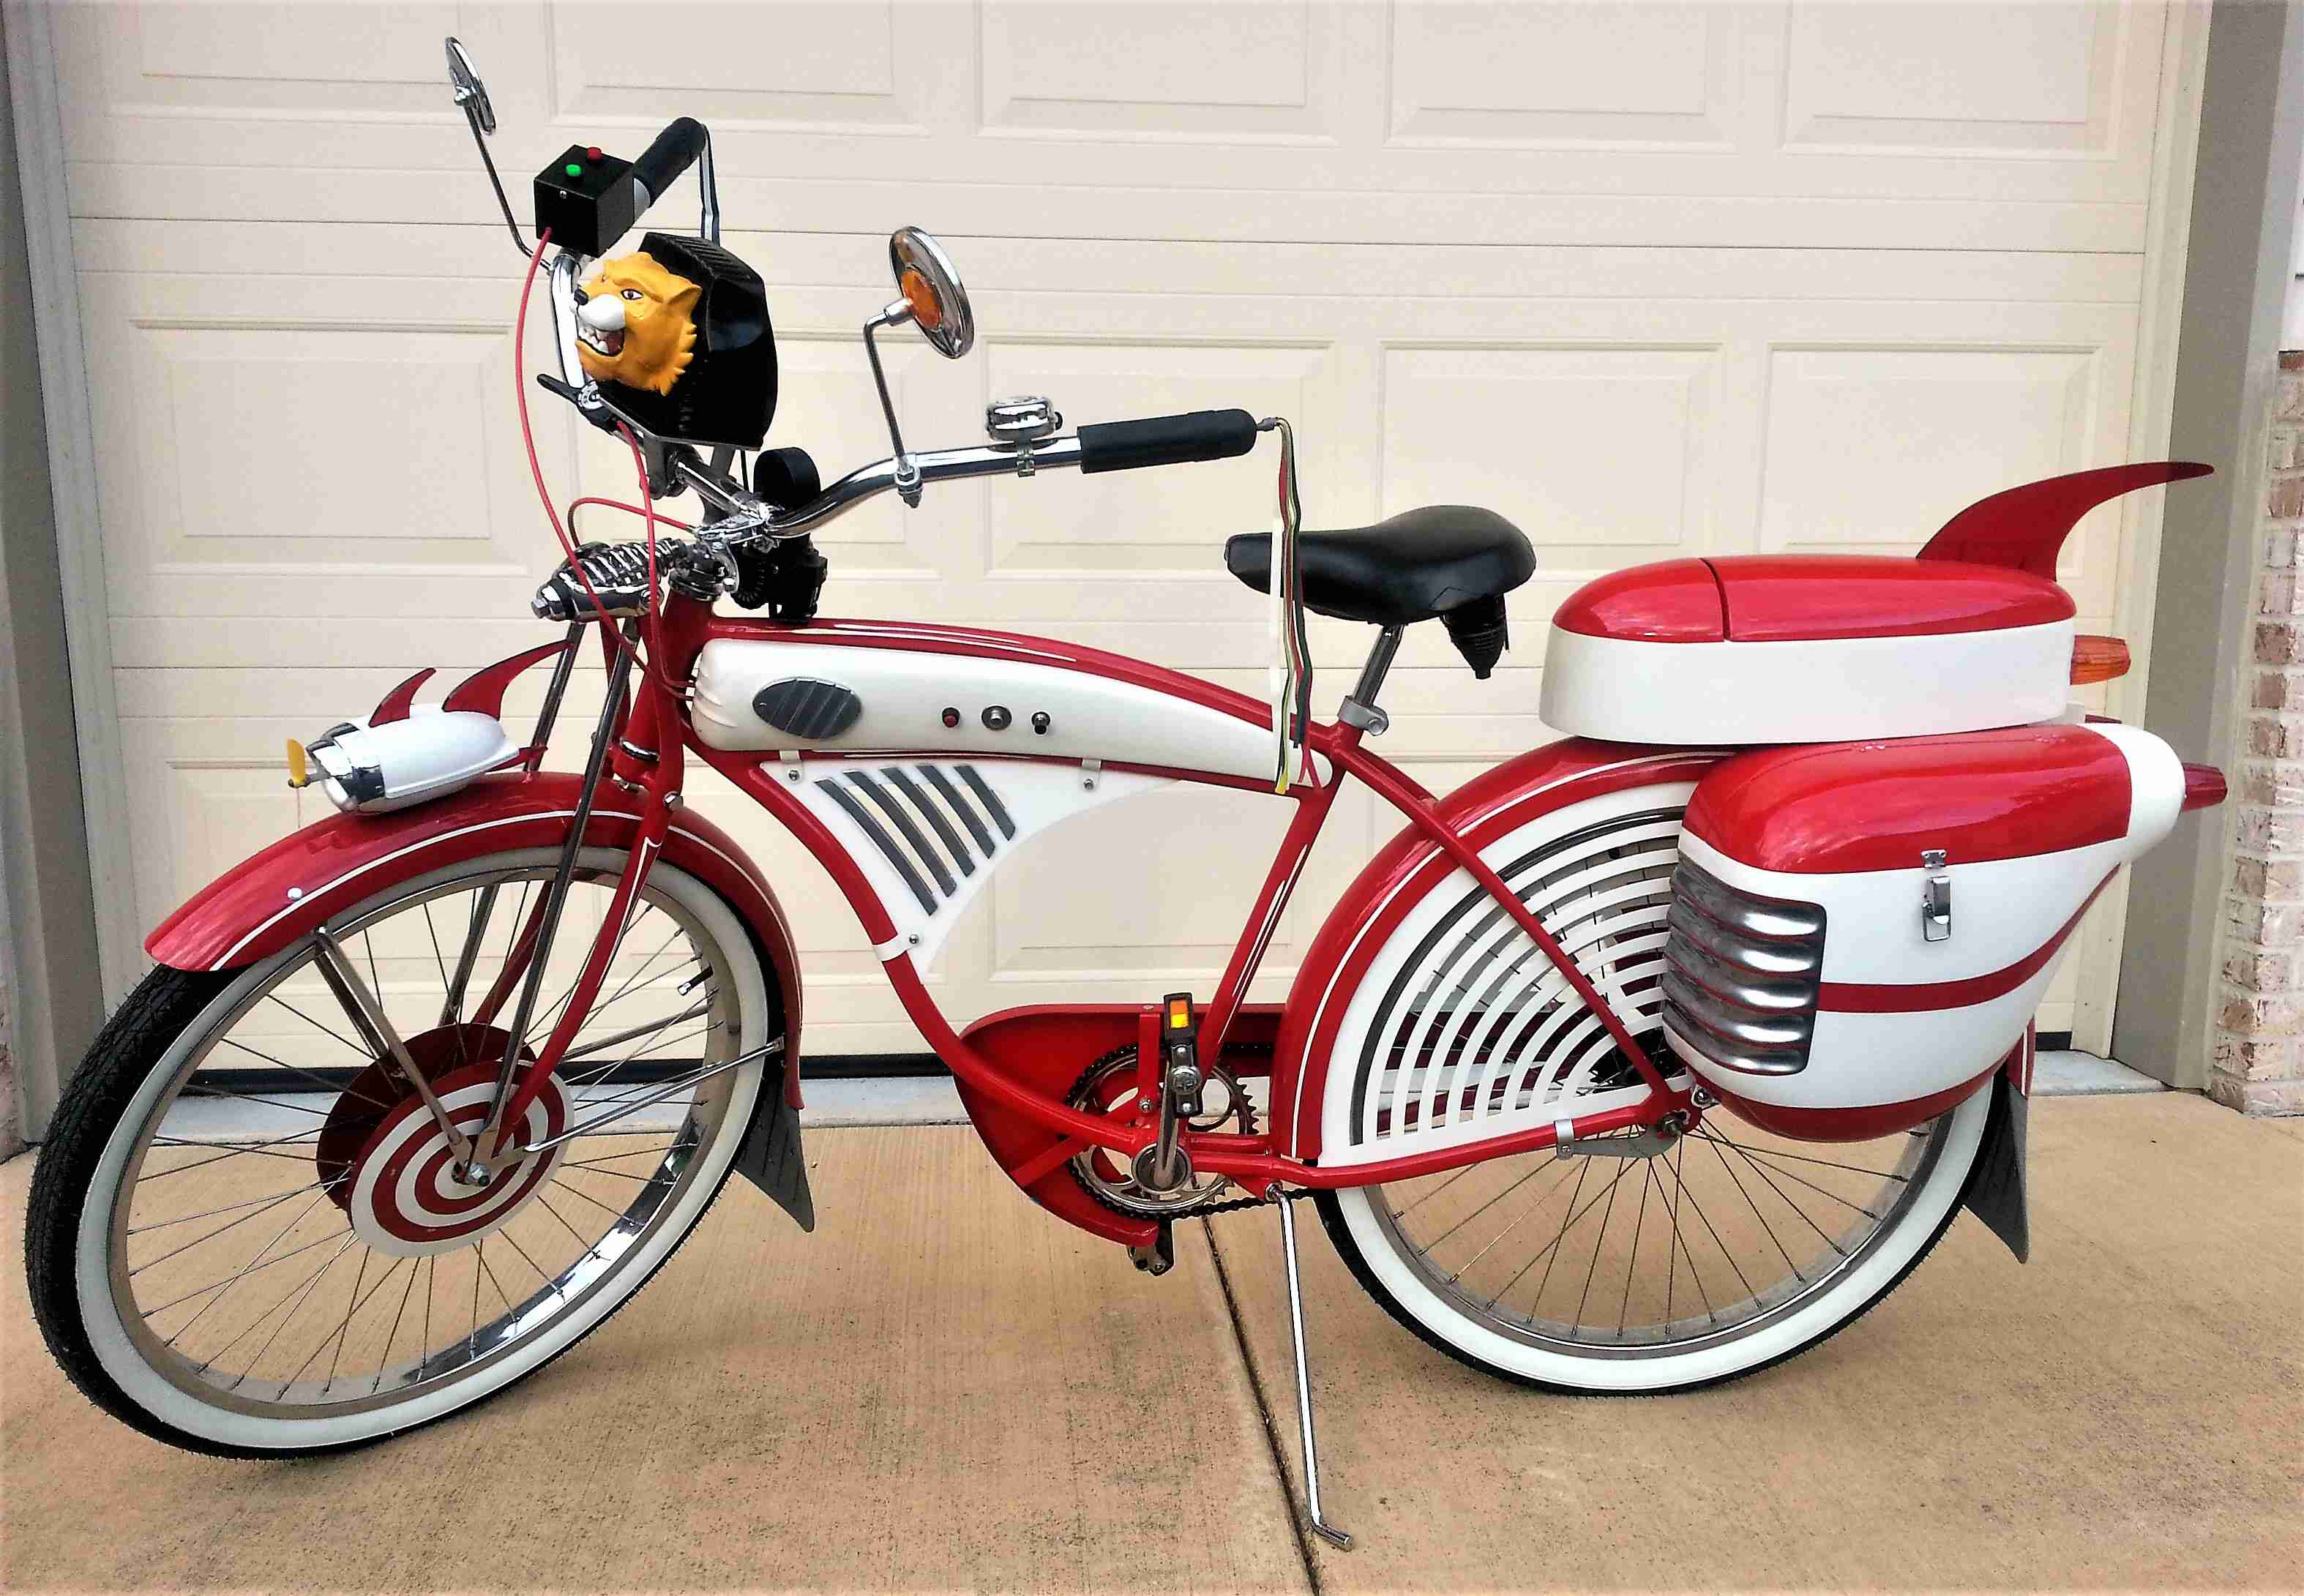 Pee-wee Herman’s Famous Bicycle Spotted Outside Auction House After Record-Breaking Sale